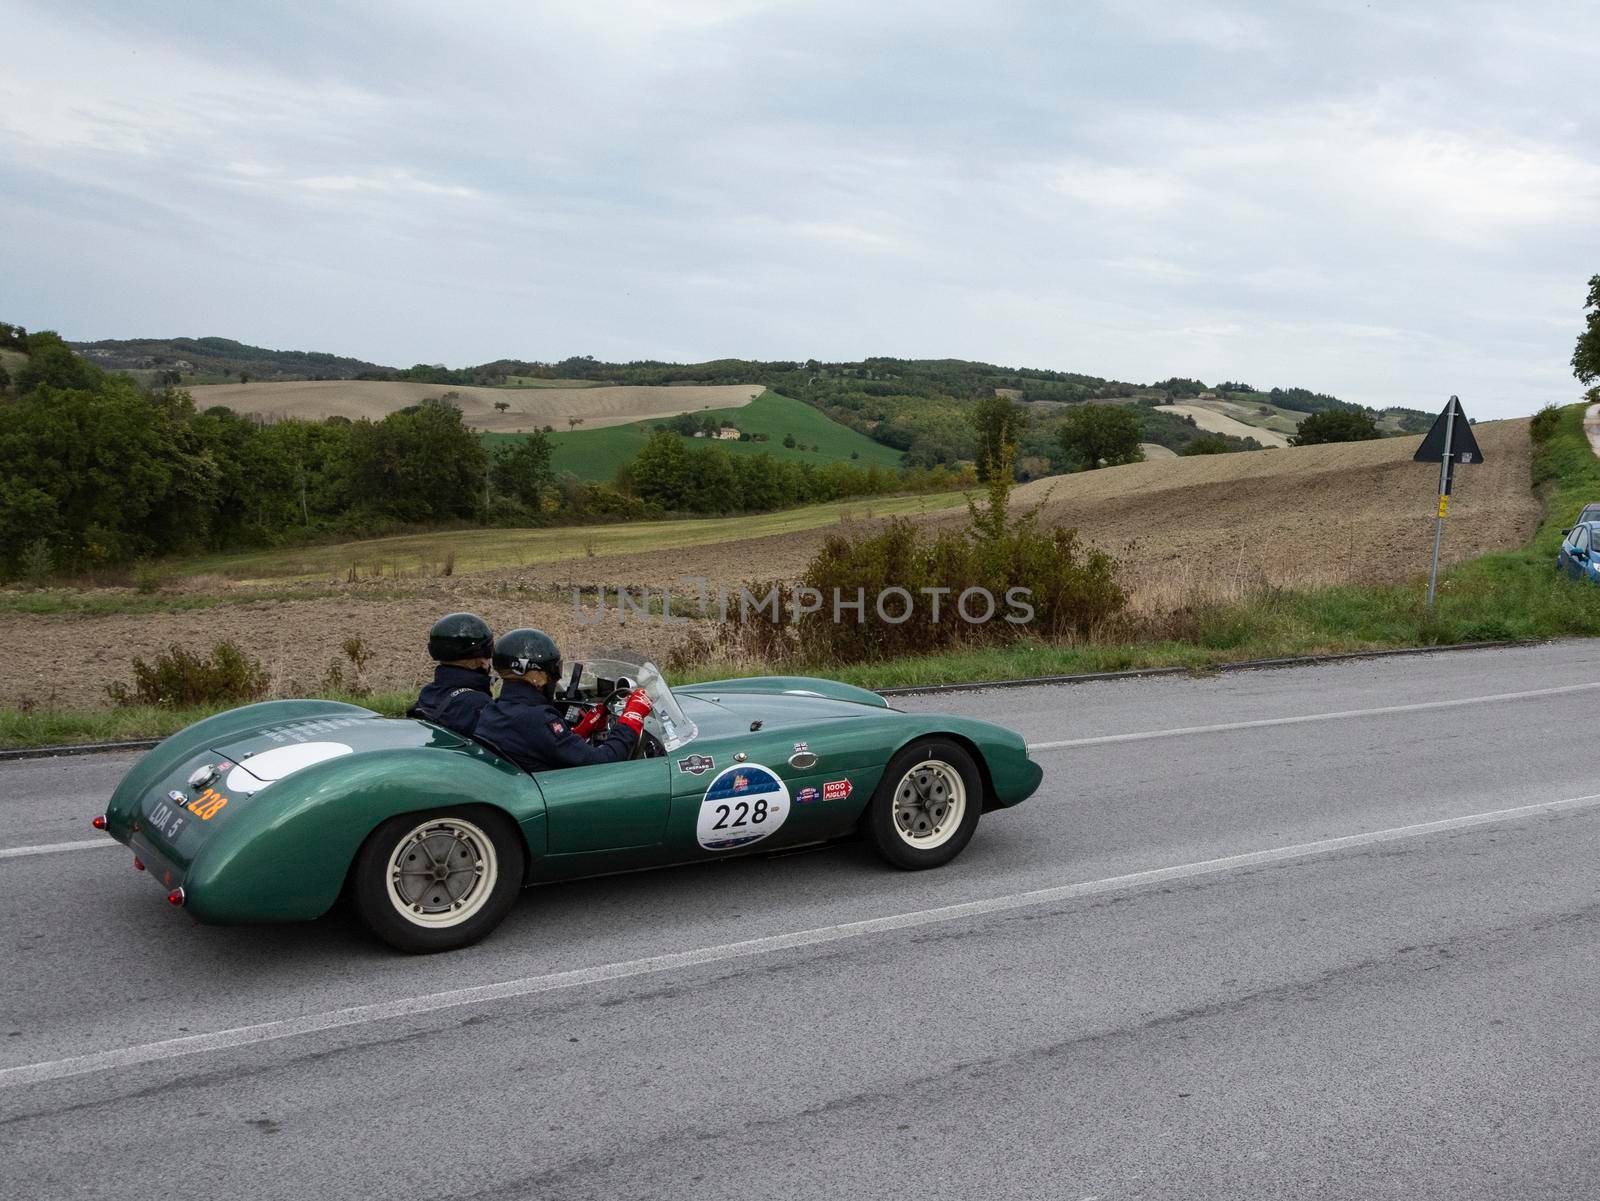 KIEFT TURNER 1953 on an old racing car in rally Mille Miglia 2020 the famous italian historical race (1927-1957) by massimocampanari